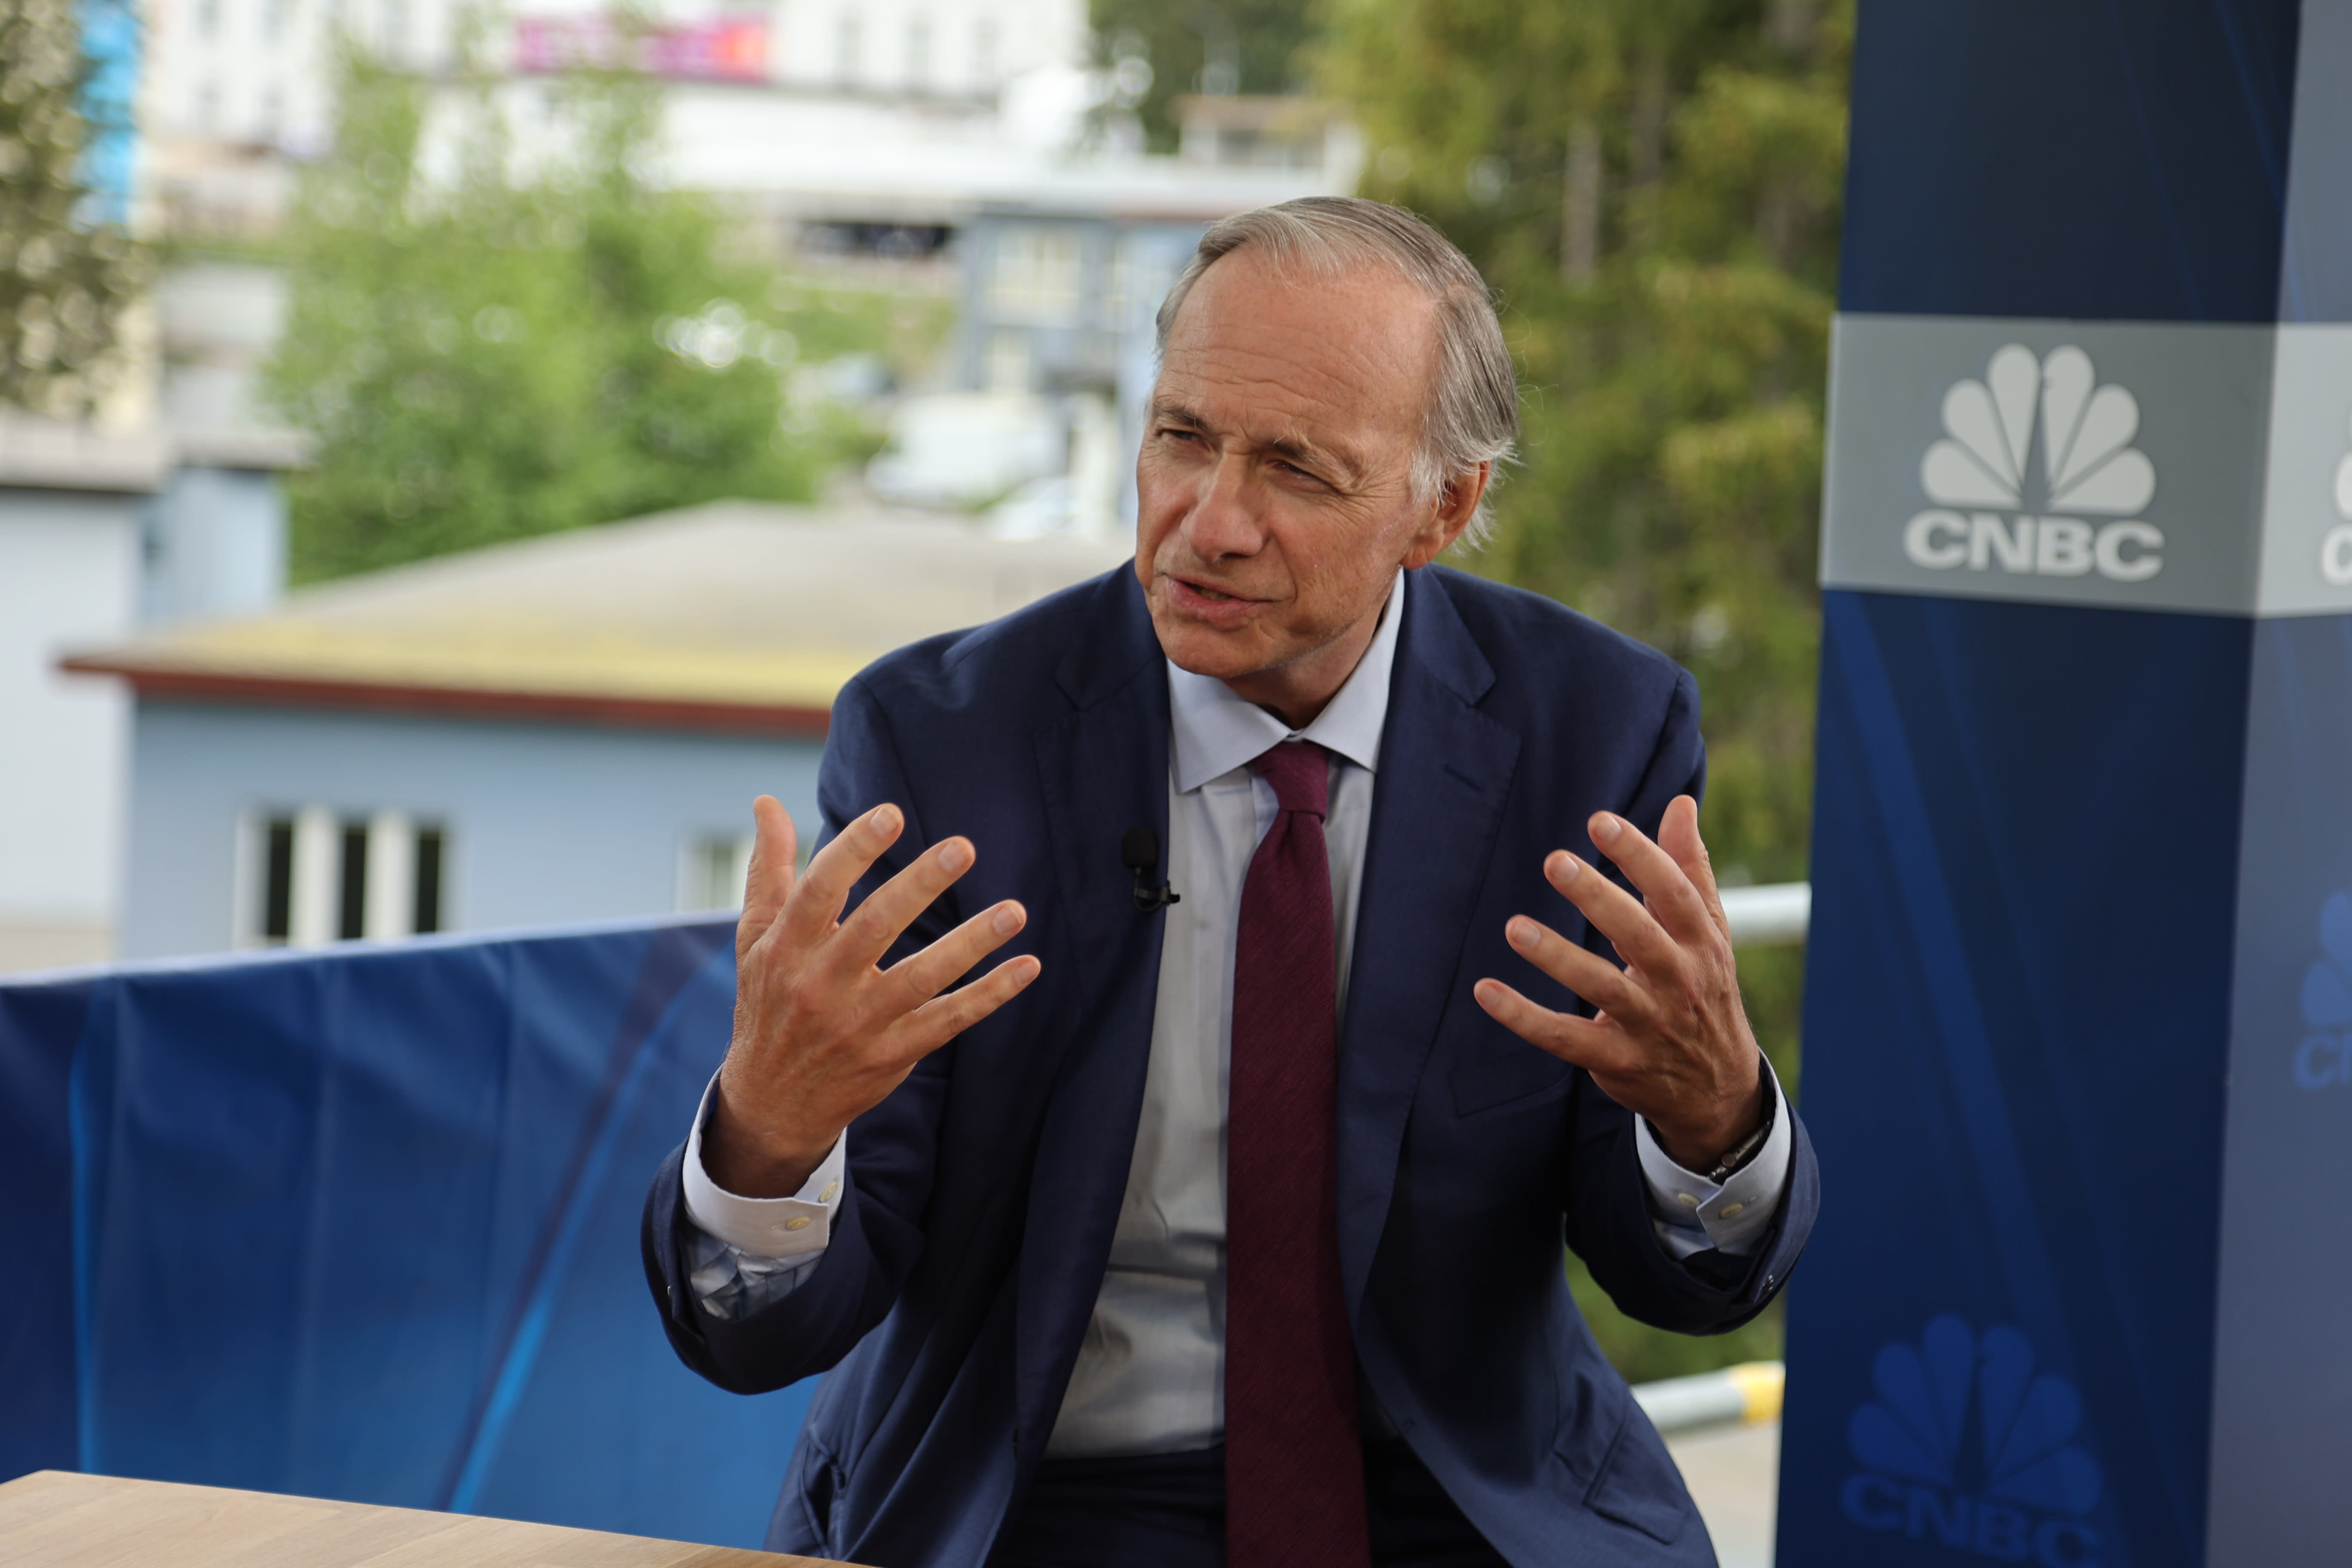 Ray Dalio says high interest rates to squash inflation could send stock prices down 20%